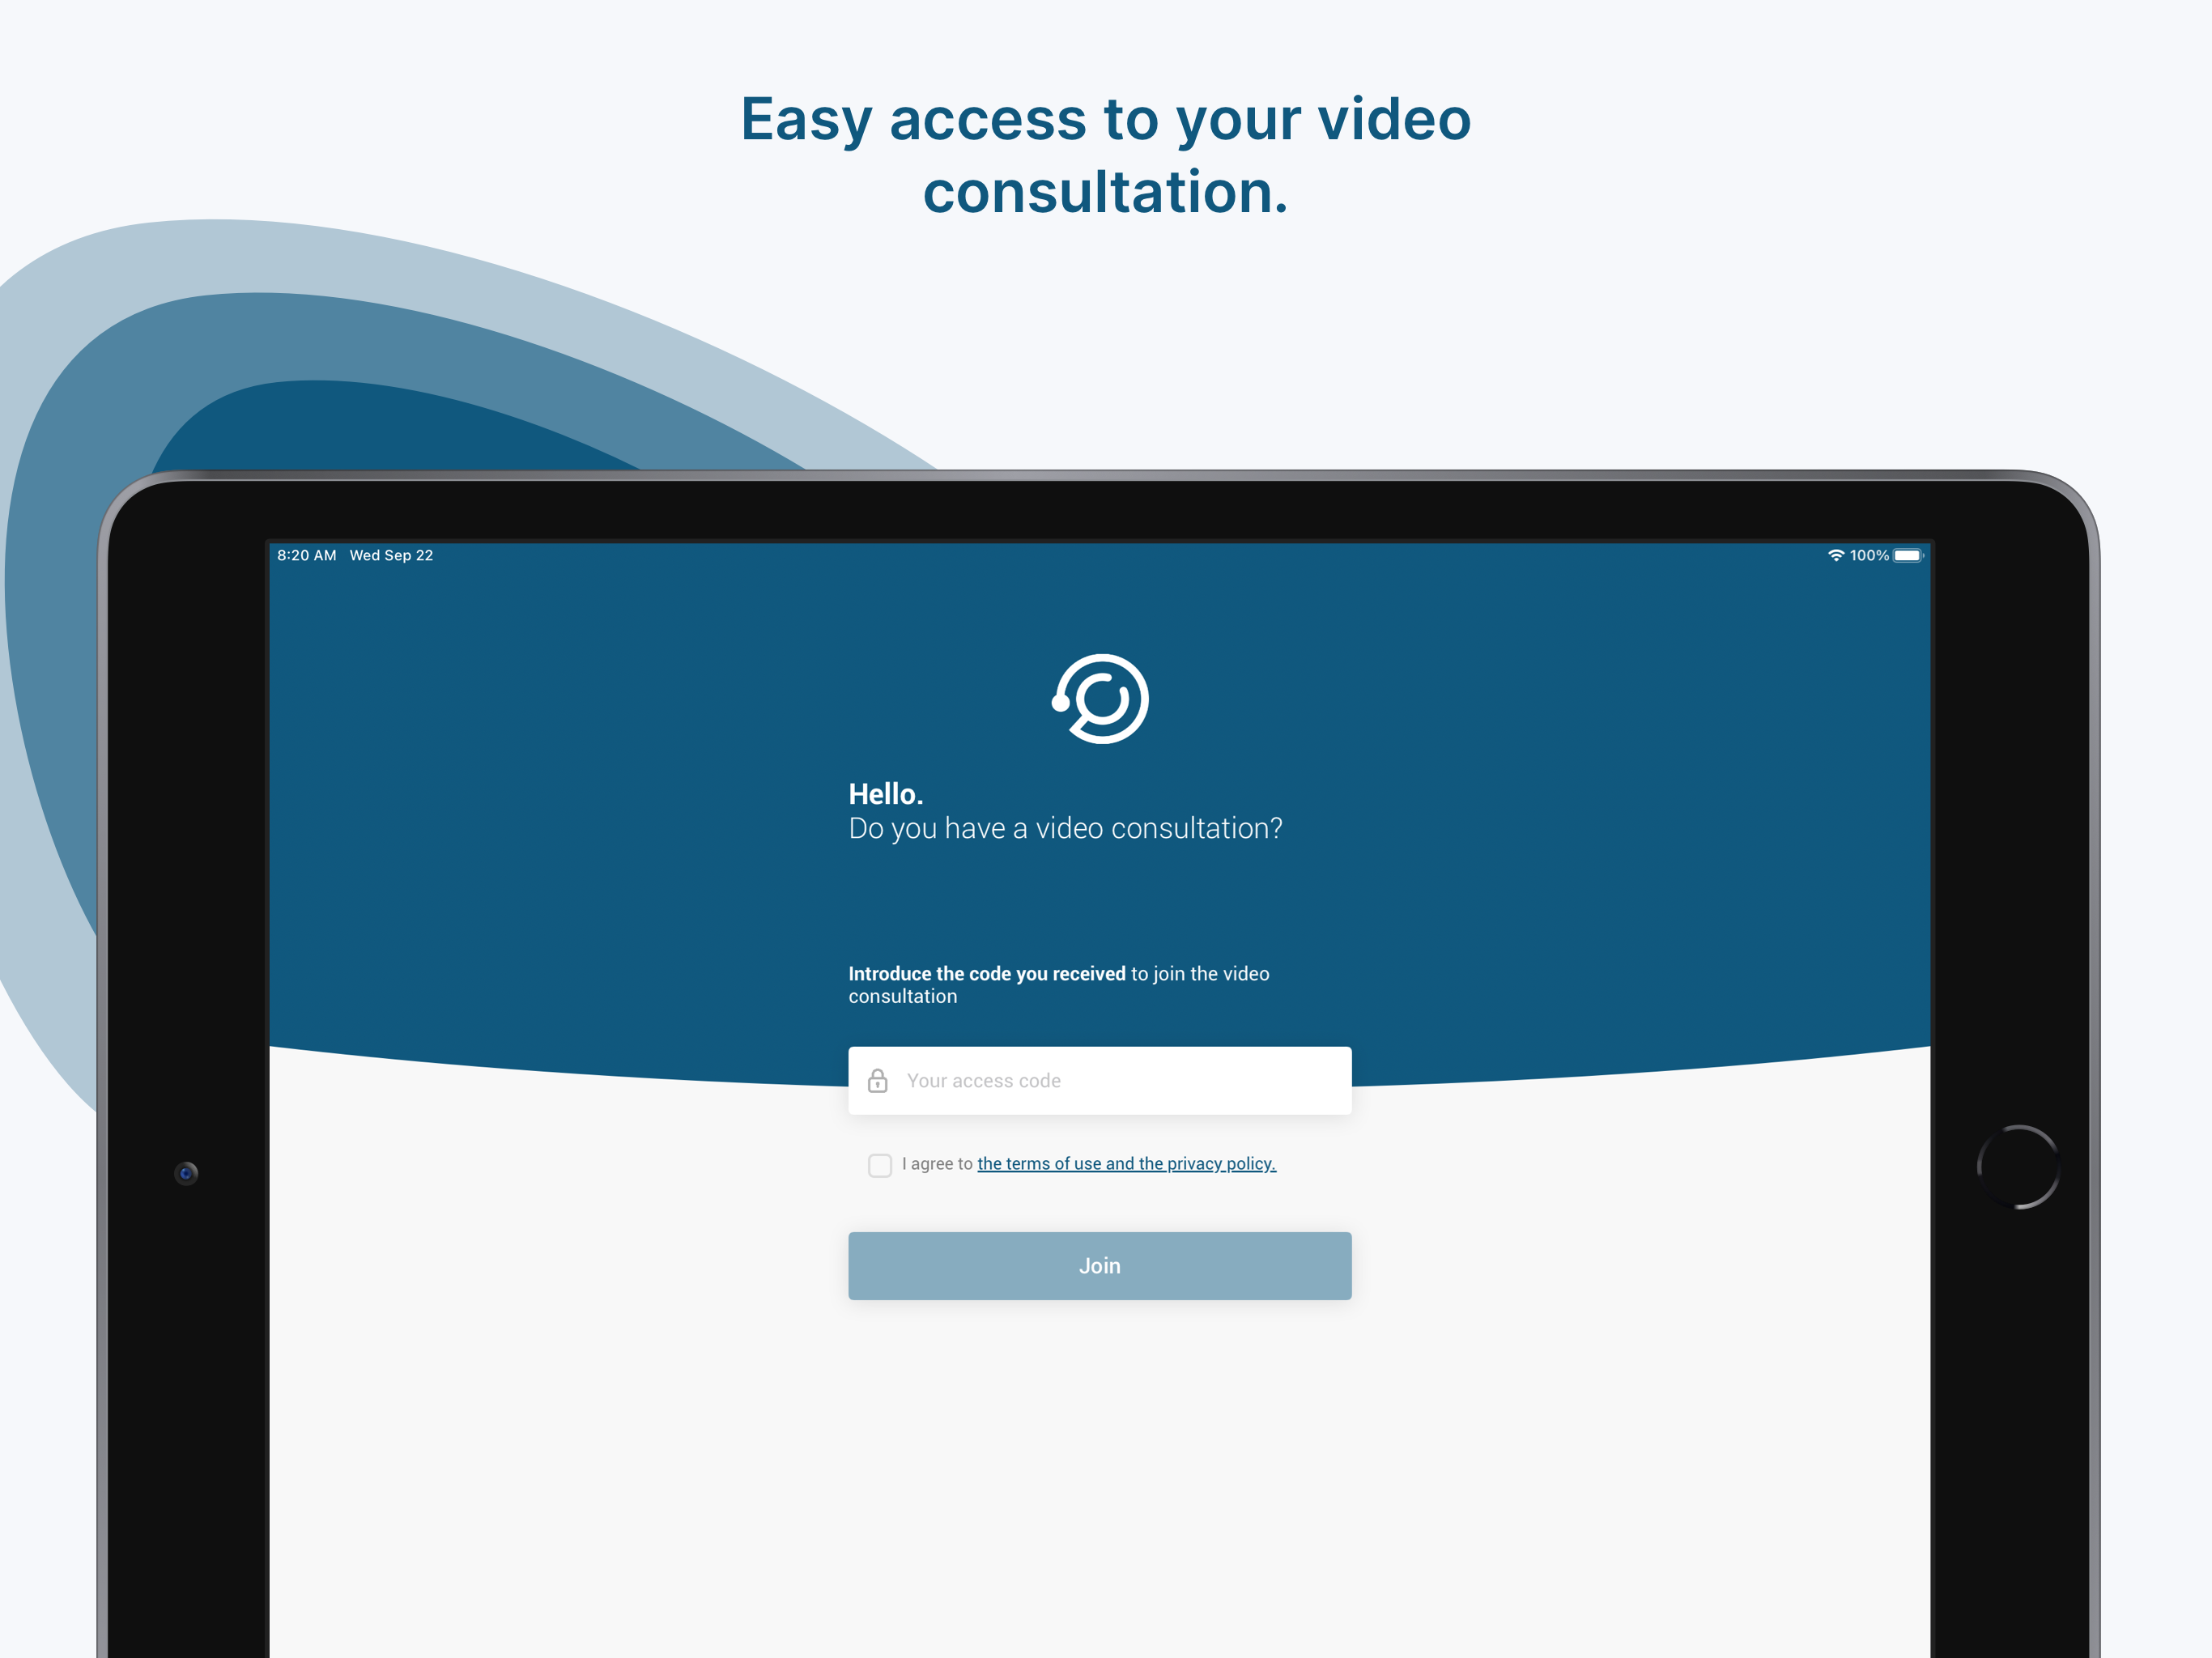 Easy access to your video consultation.